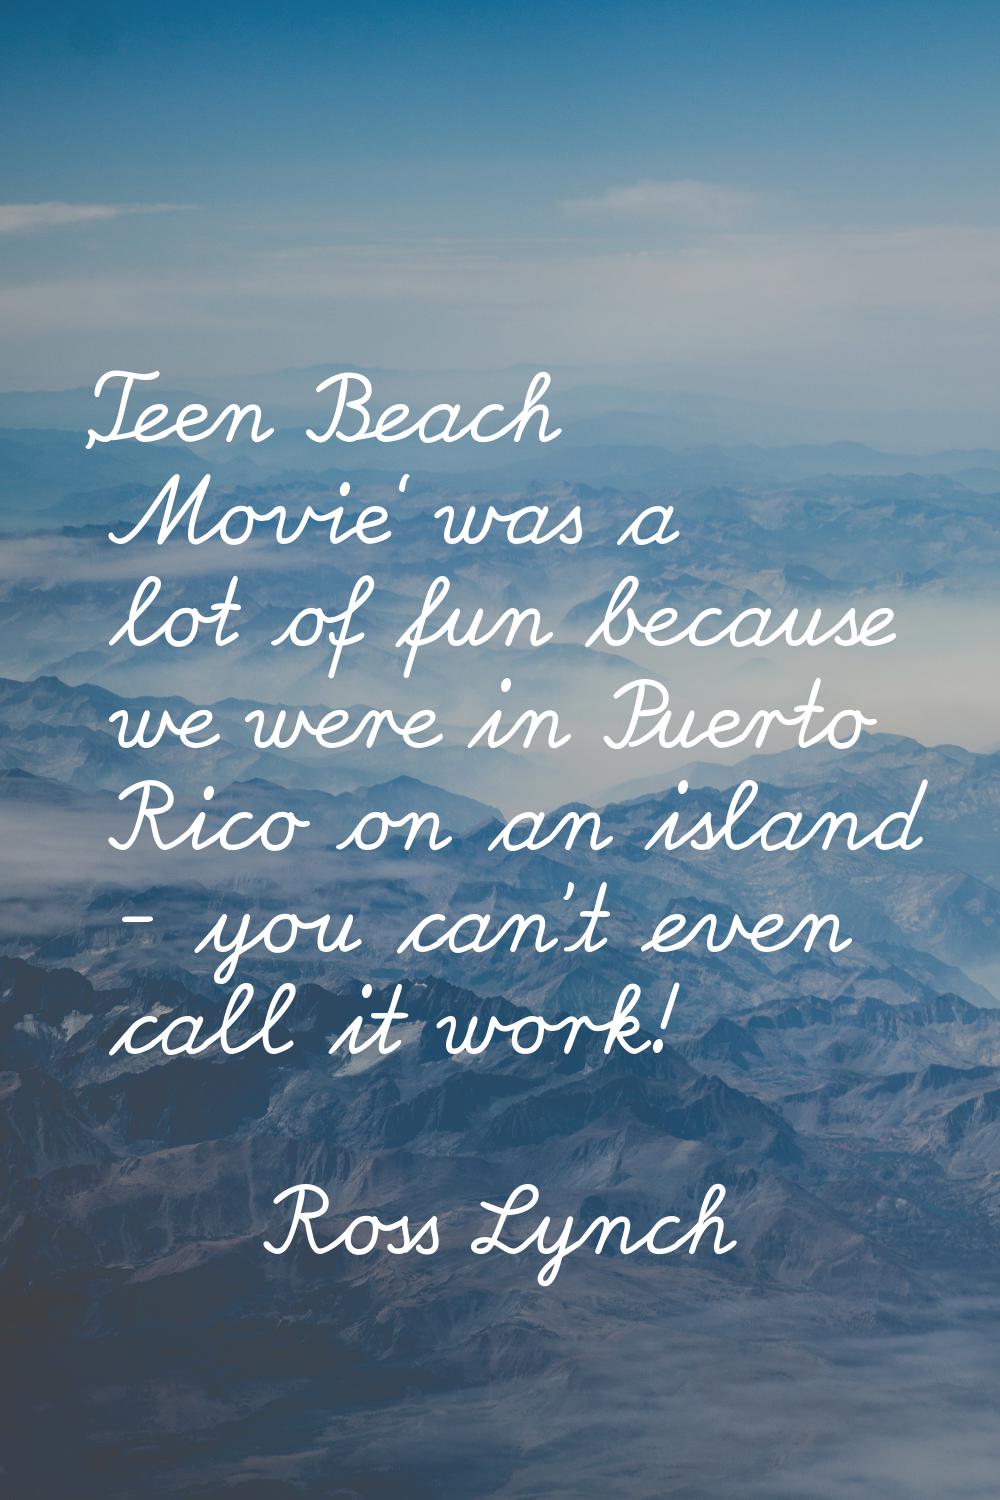 'Teen Beach Movie' was a lot of fun because we were in Puerto Rico on an island - you can't even ca